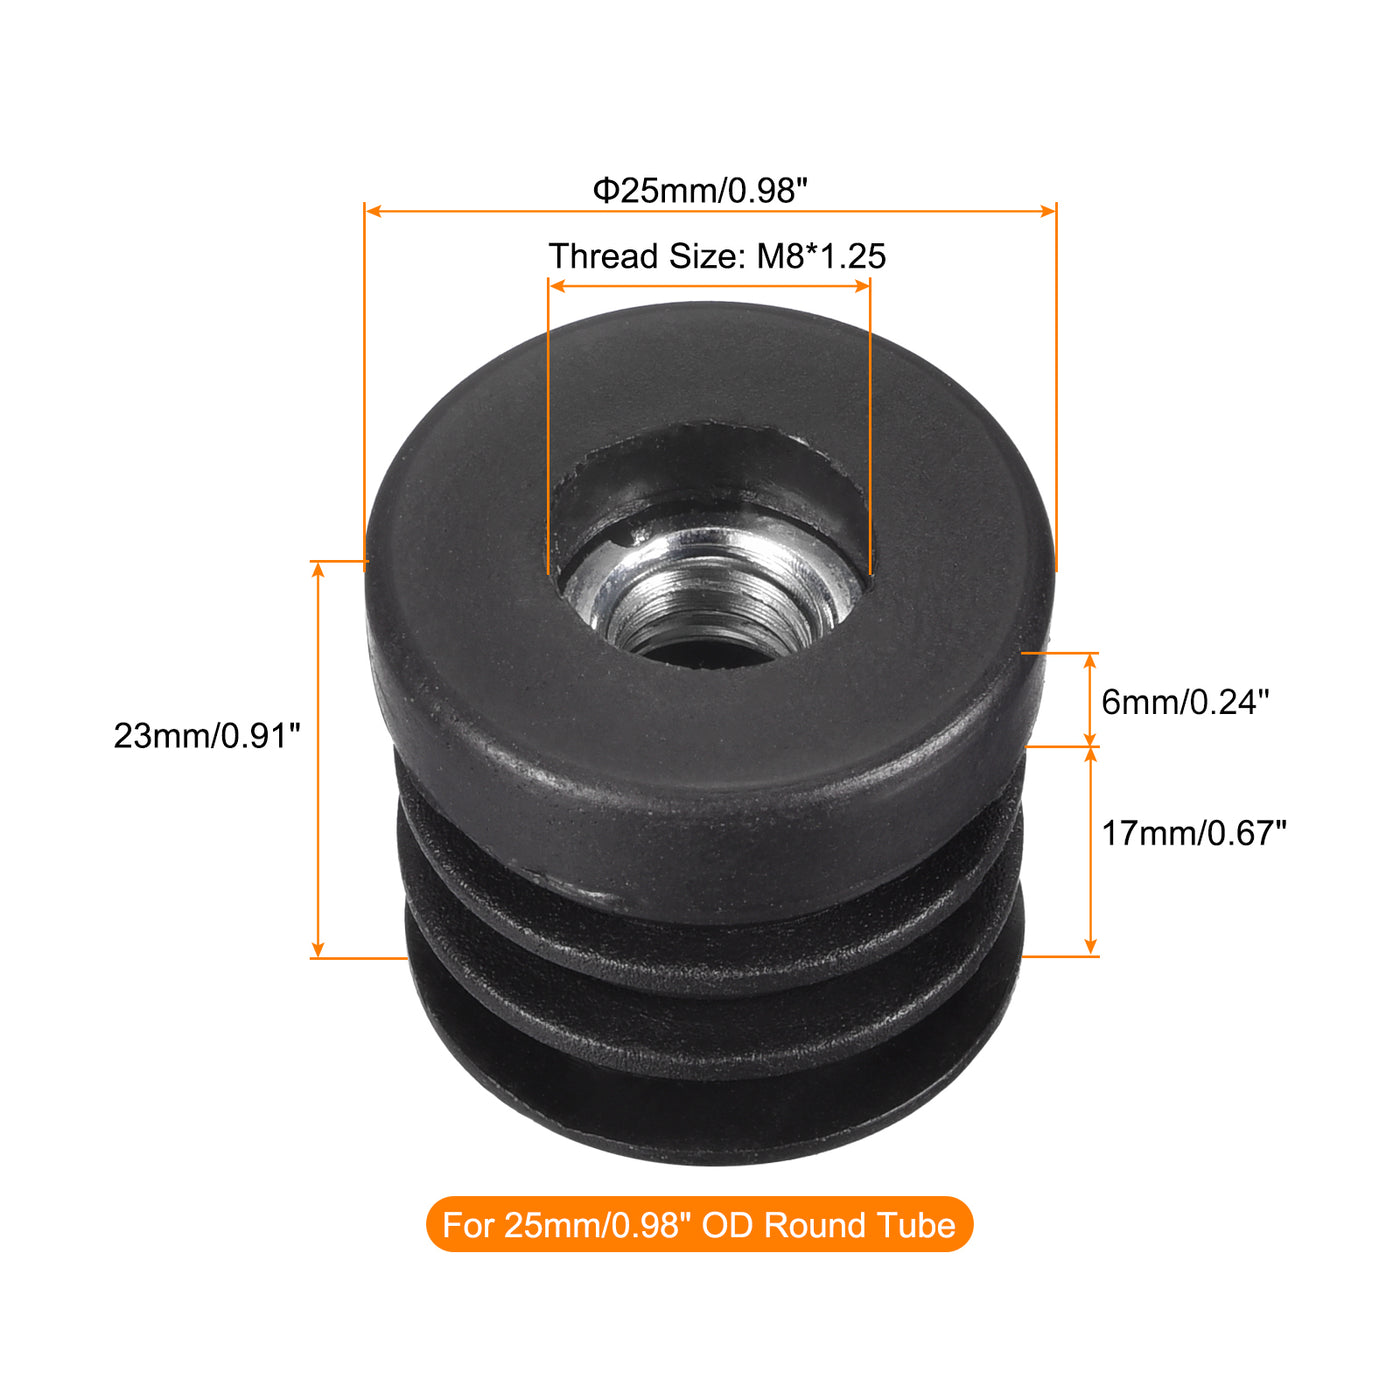 uxcell Uxcell 12Pcs 25mm/0.98" Caster Insert with Thread, Round M8 Thread for Furniture